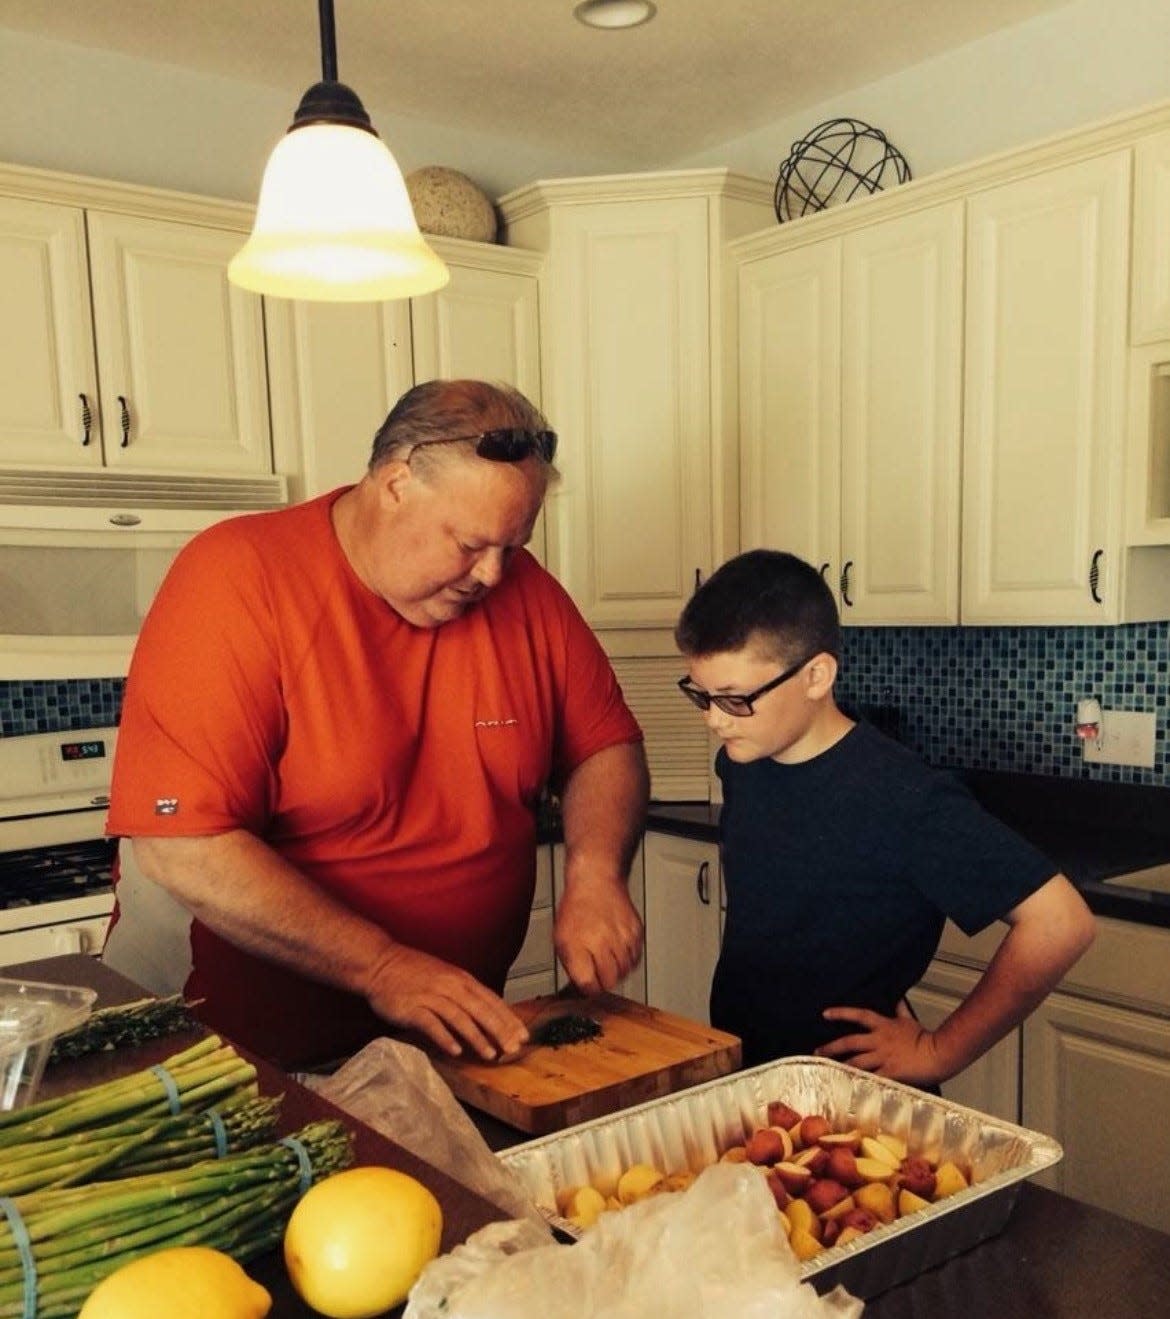 Kevin Cronin cooking in the kitchen at home with his nephew Joey Cronin.